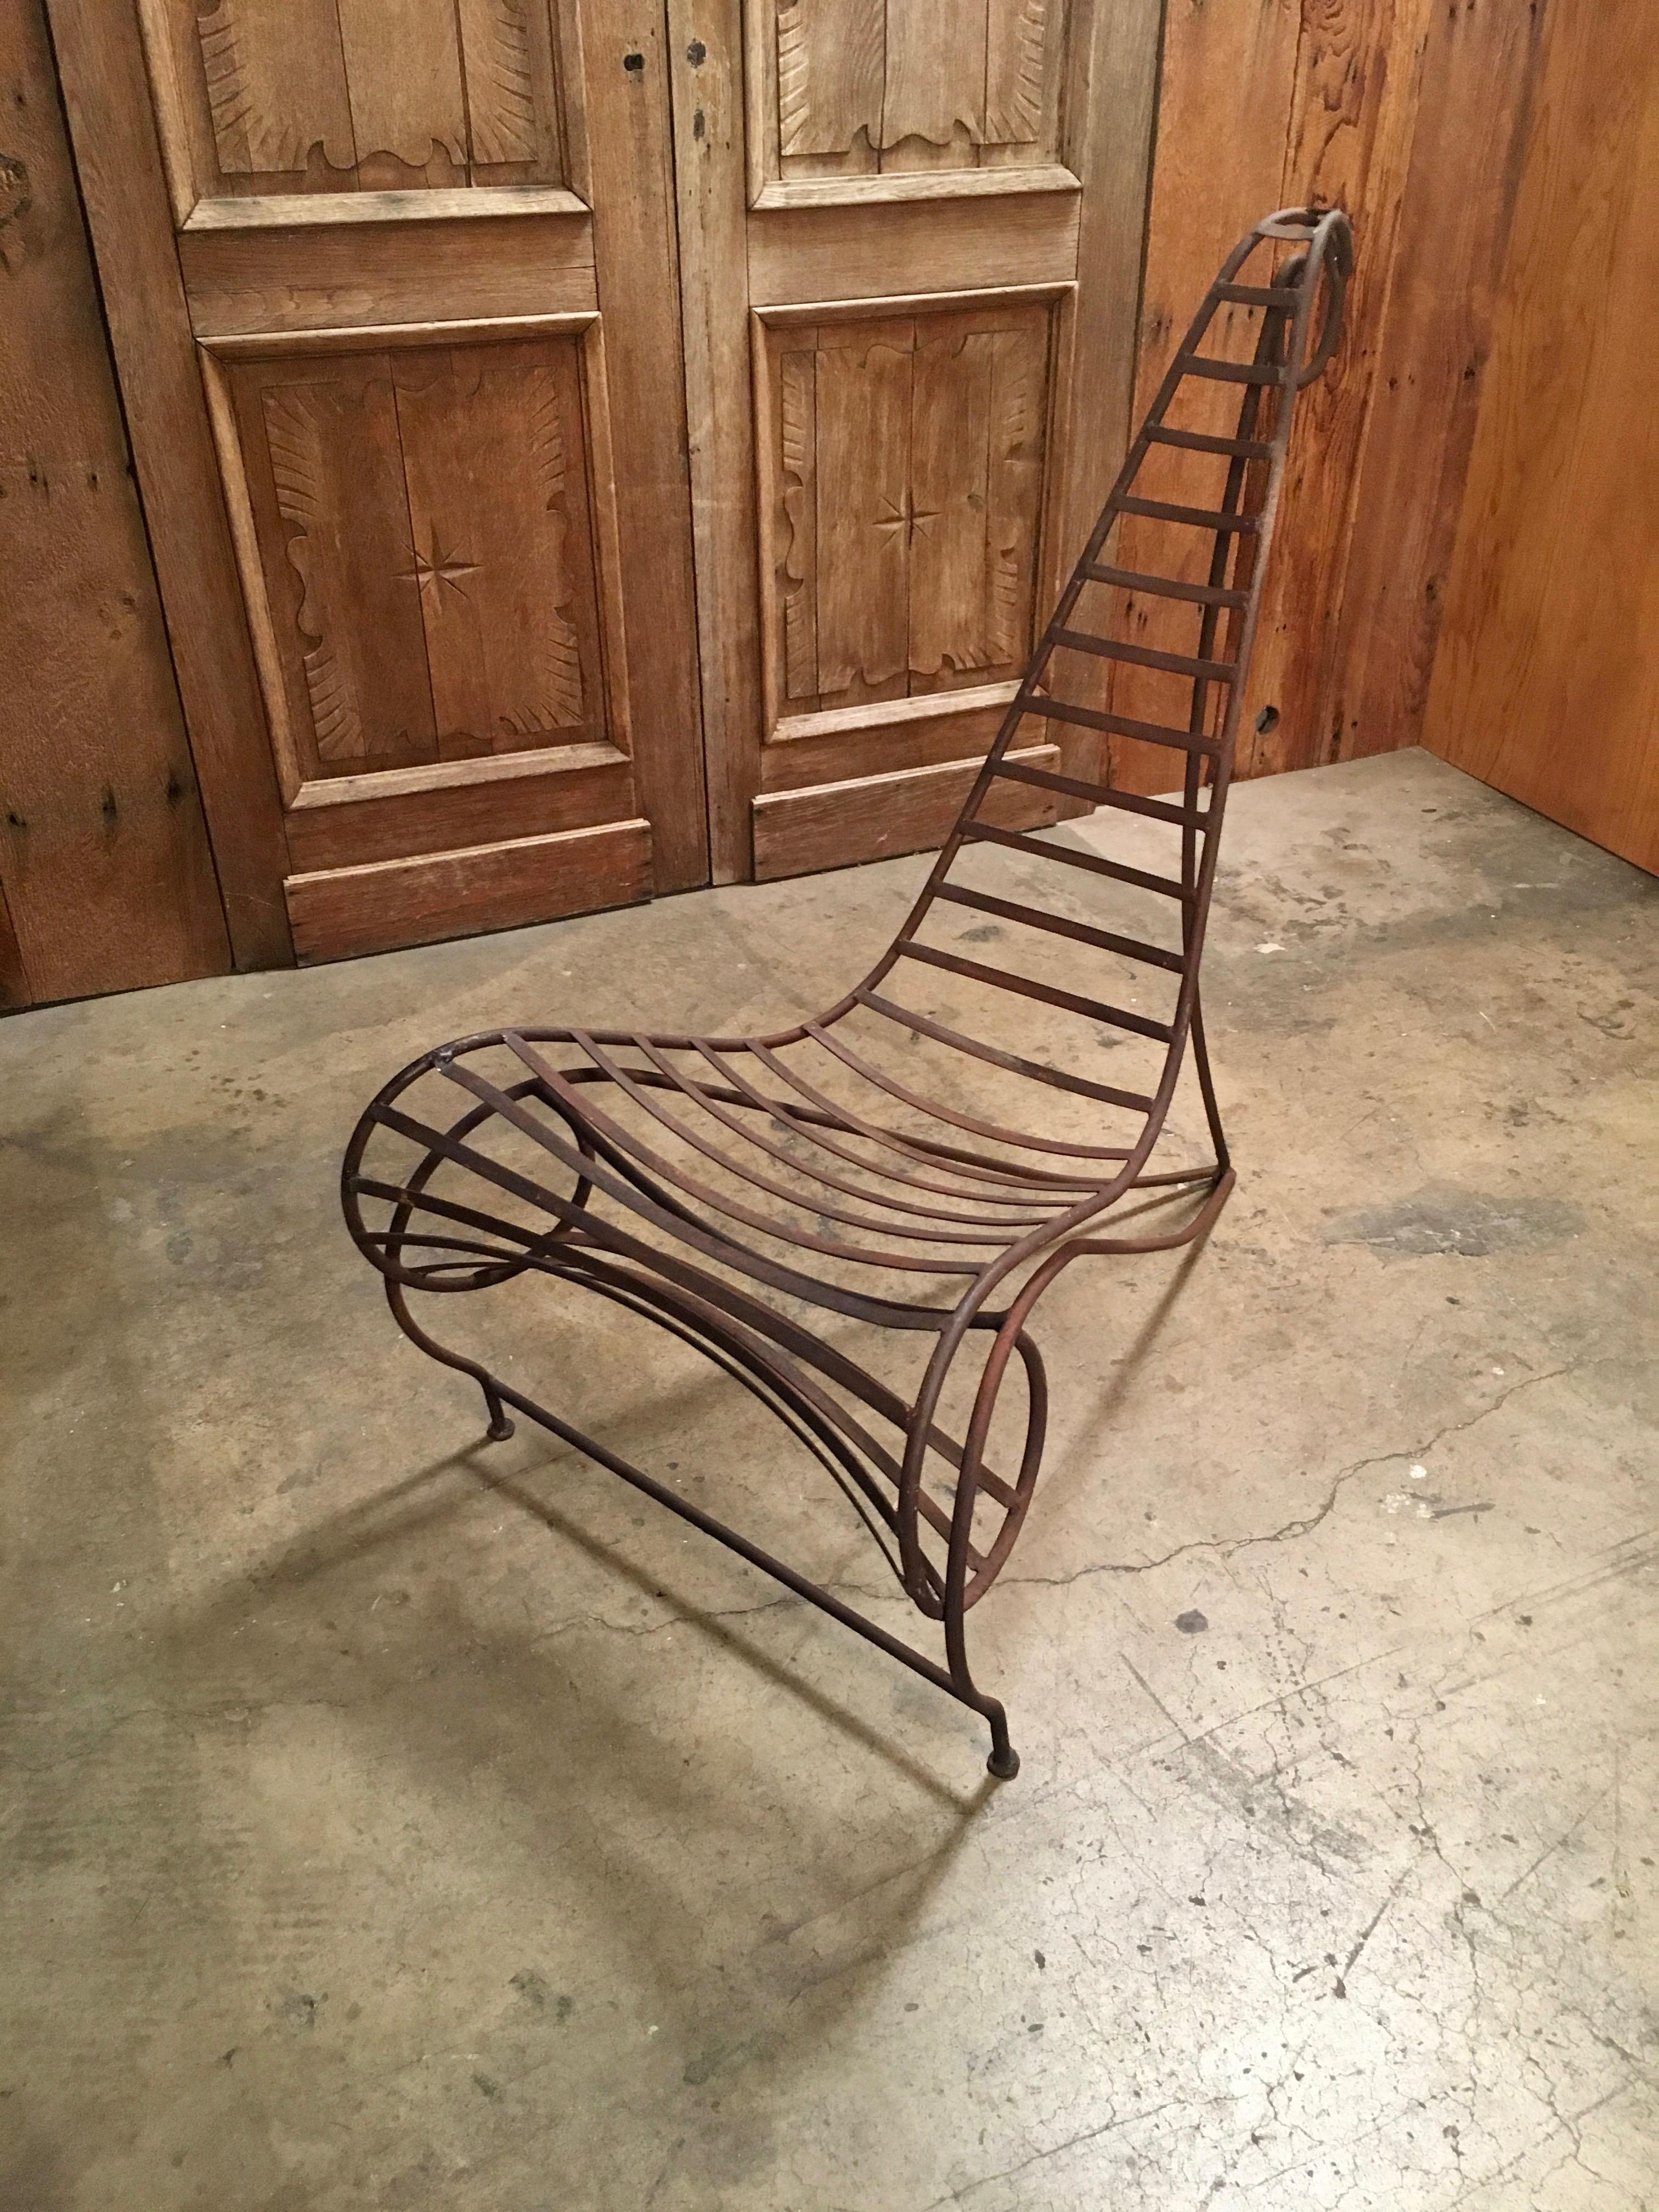 This spine chair is a work of art perfect for garden or home with nice rust patina.